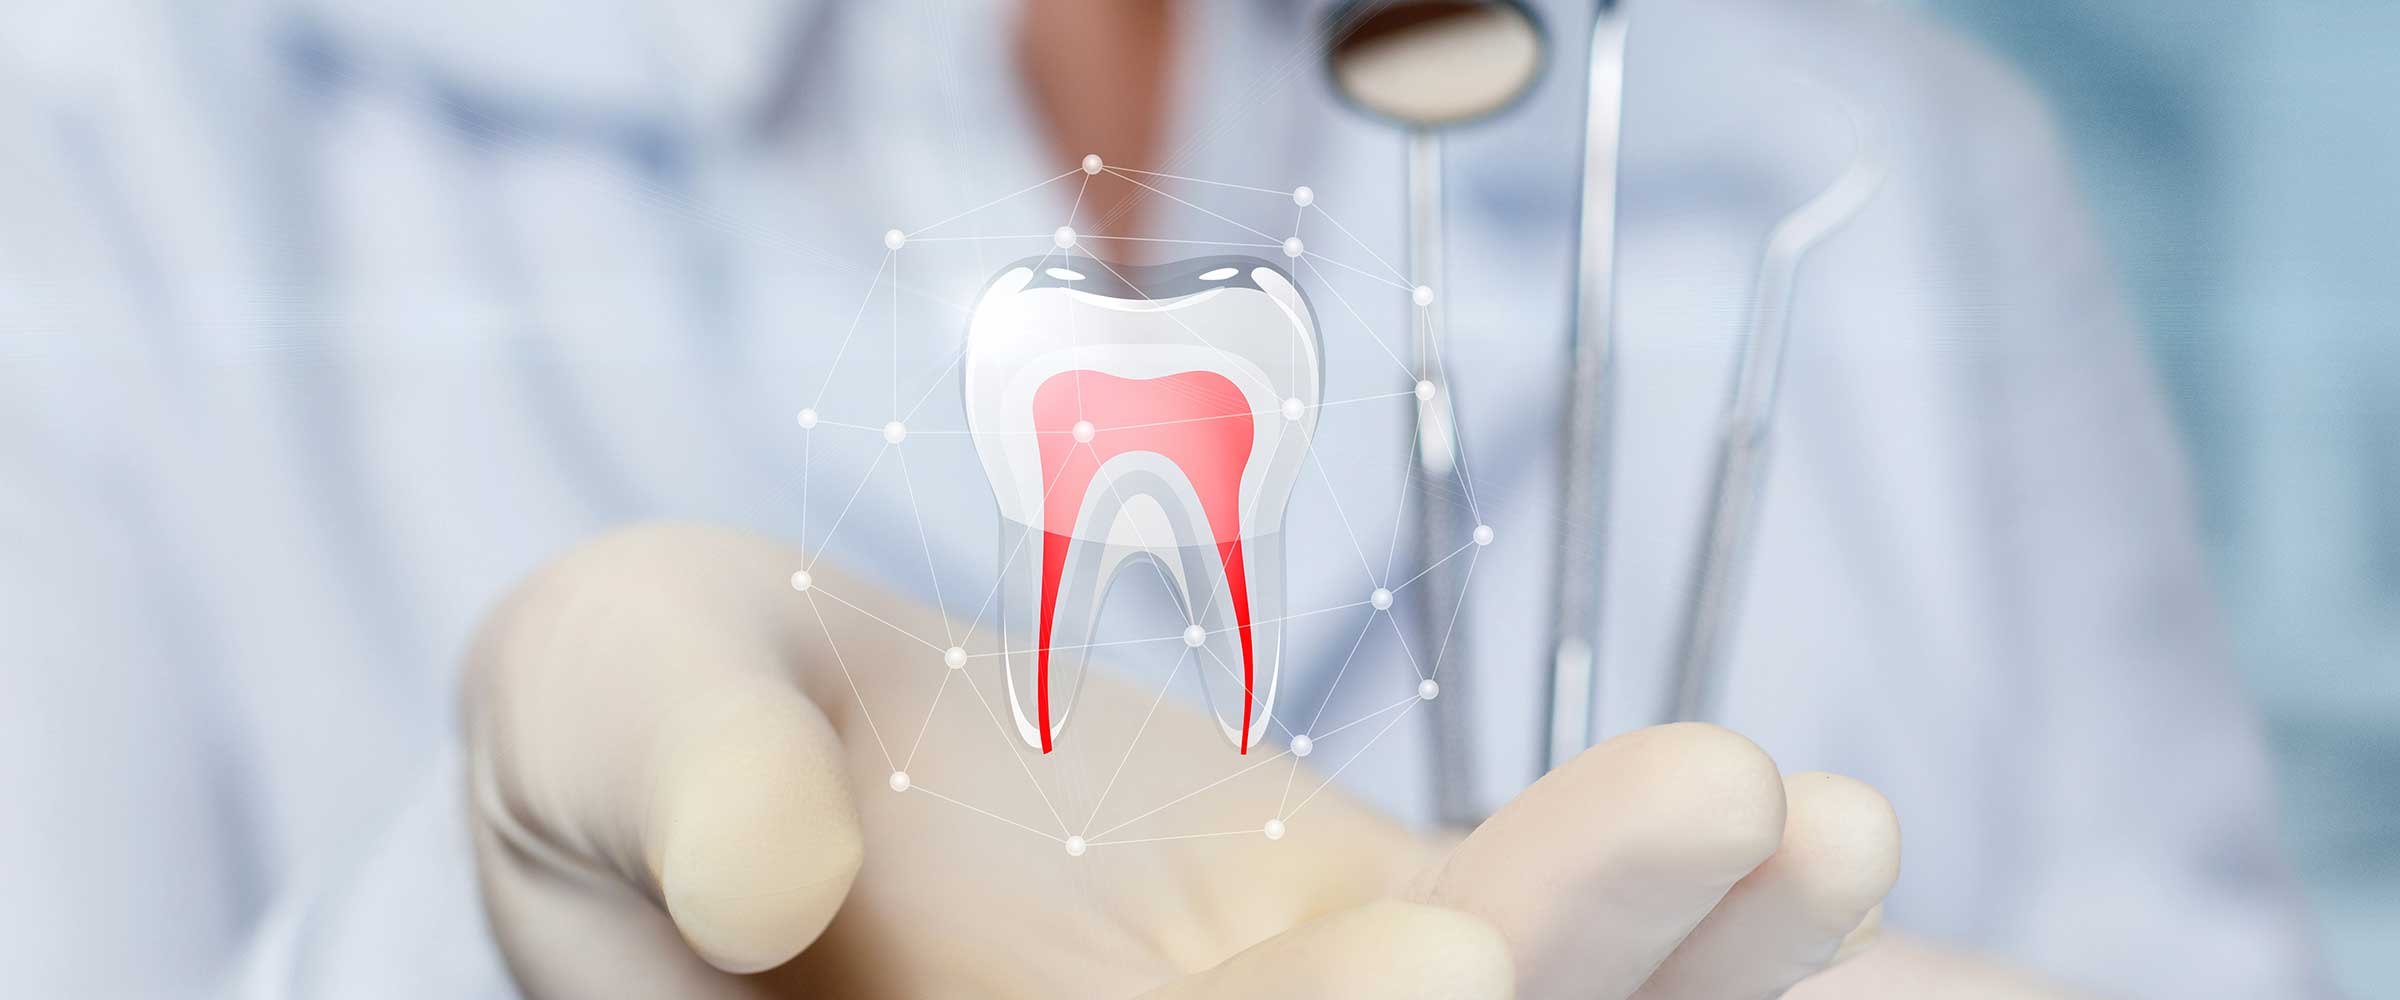 root canal treatment singapore